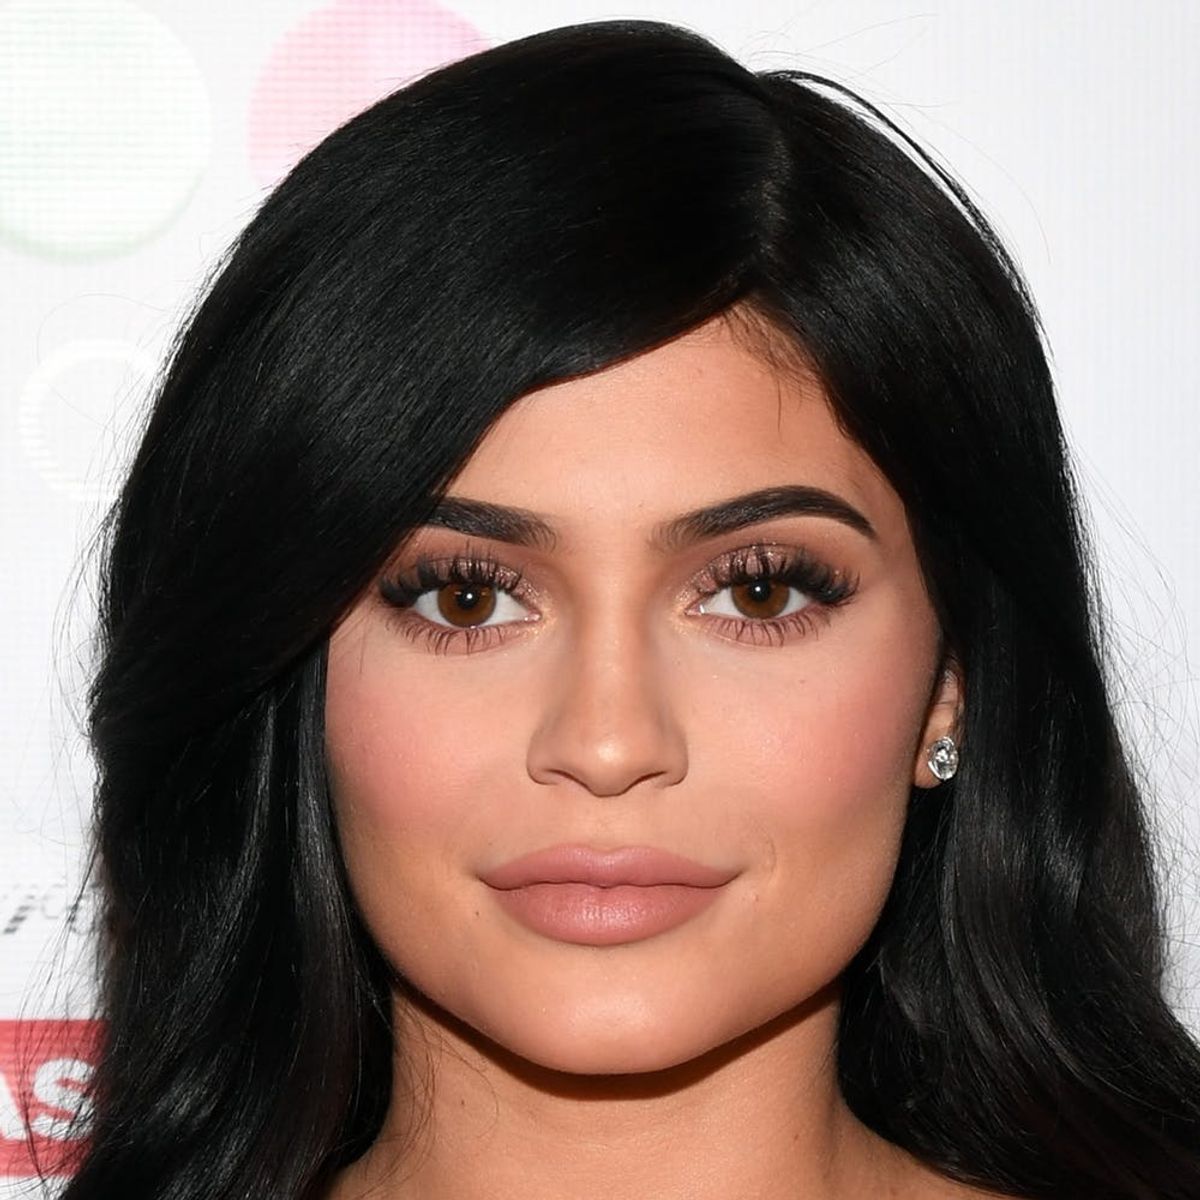 Fans Think That Kylie Jenner’s Butterfly Rings, Nail Polish Are a Gender Reveal